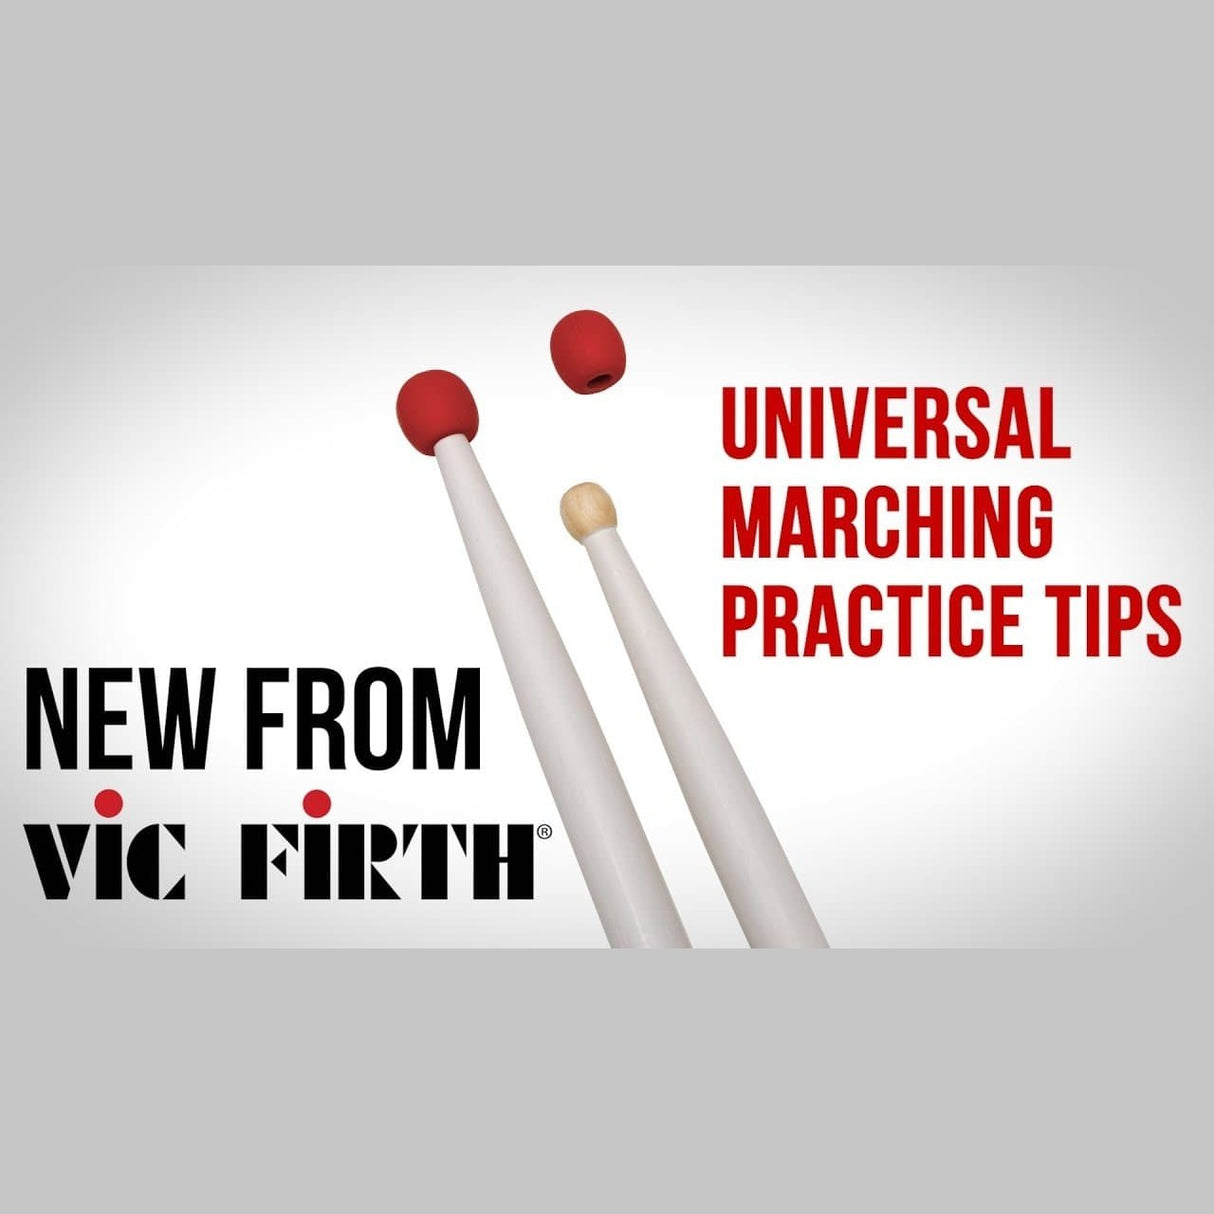 Vic Firth Universal Marching Practice Tips